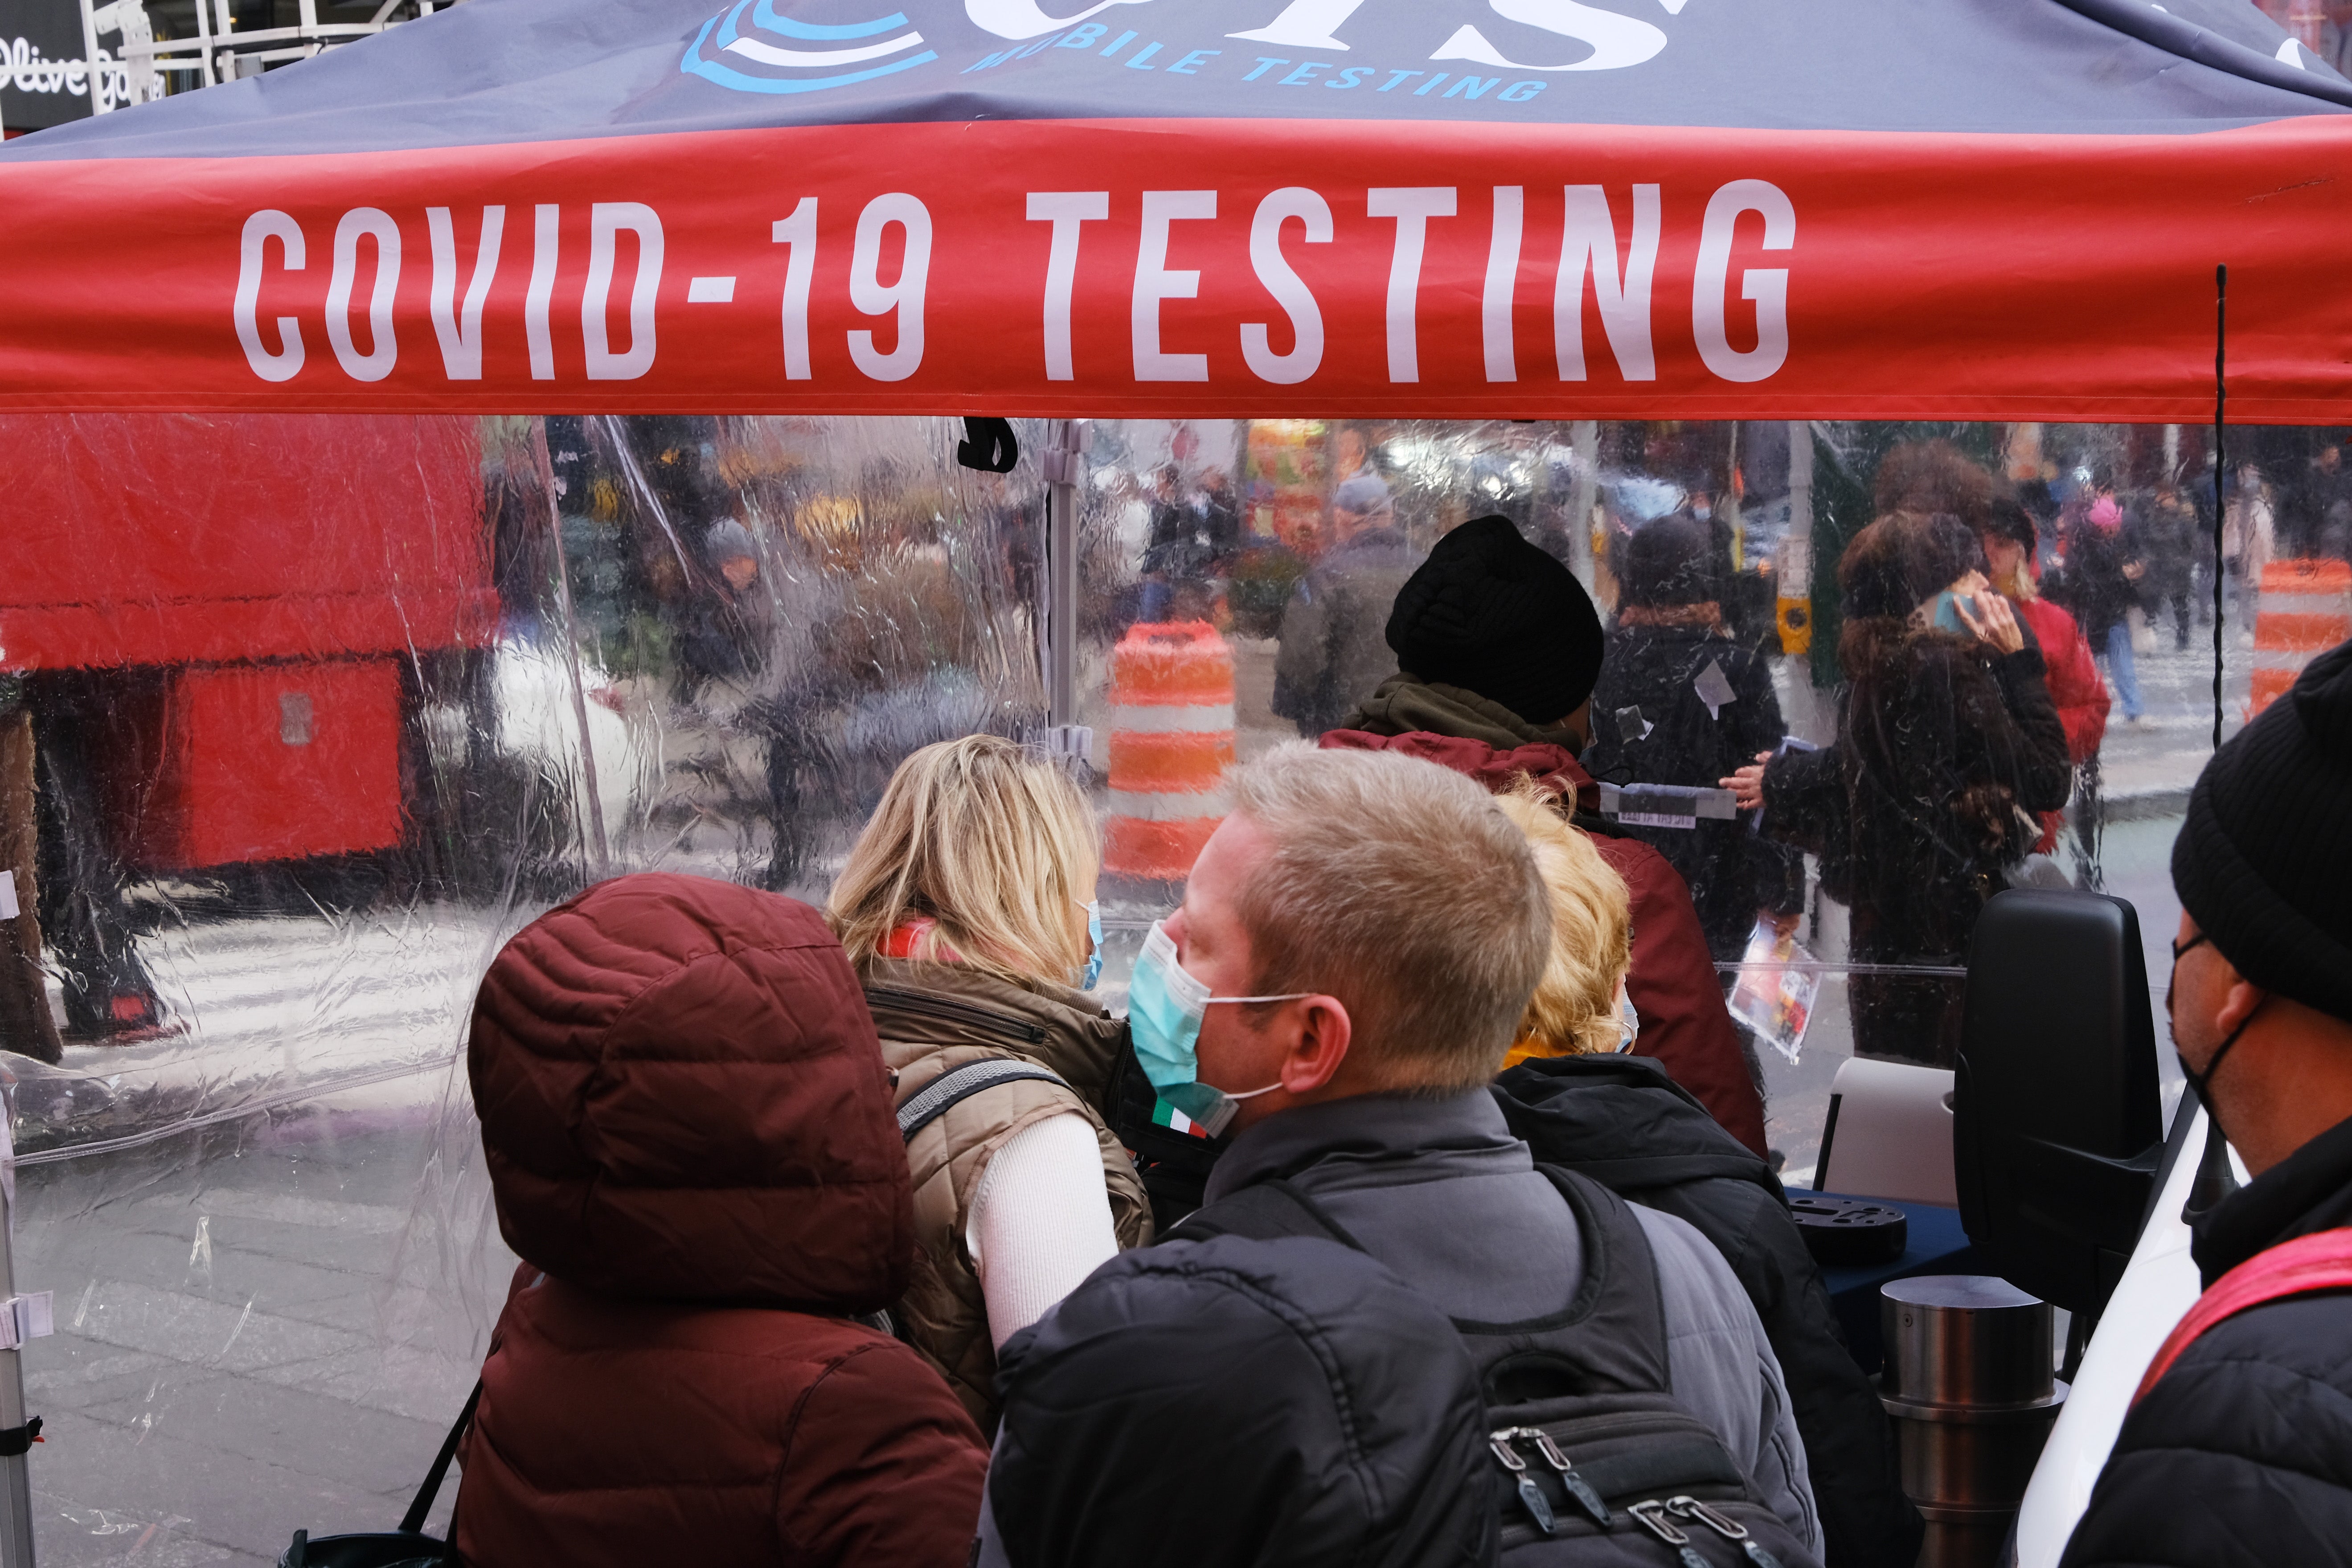 People wait in line to get tested for Covid at a testing facility at Times Square on 9 December 2021